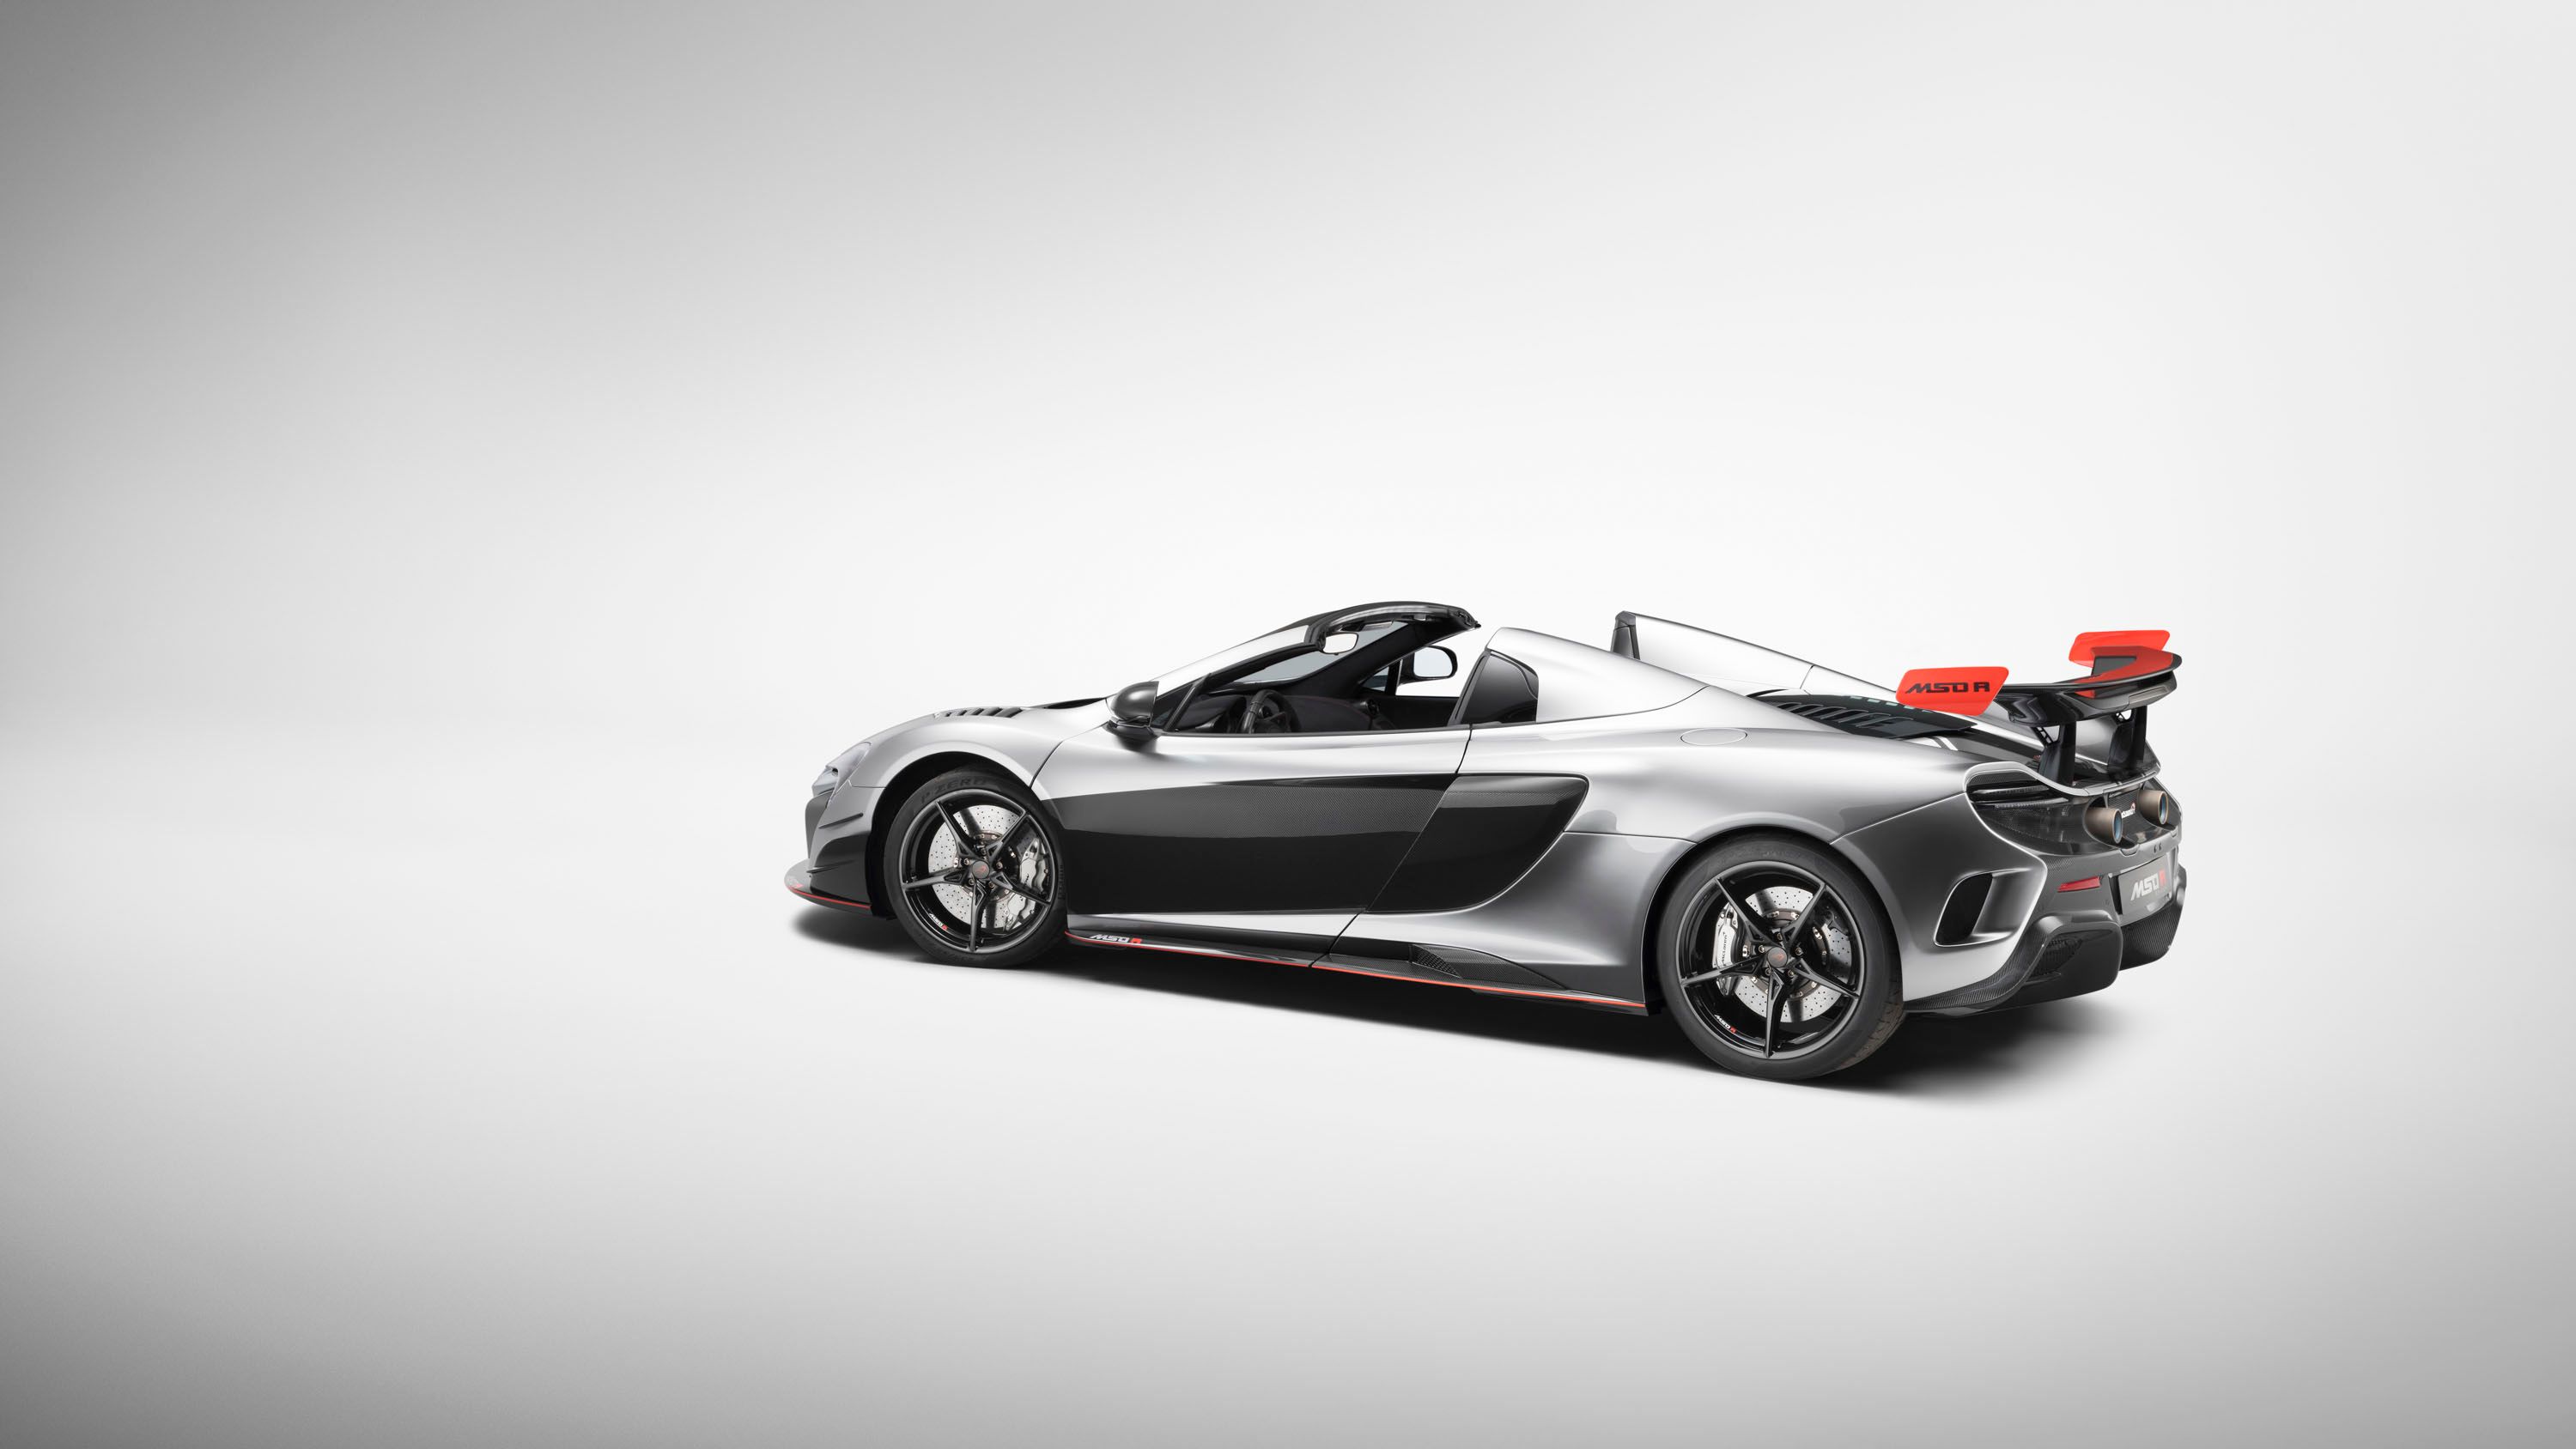 2017 McLaren MSO R Coupe and Spider